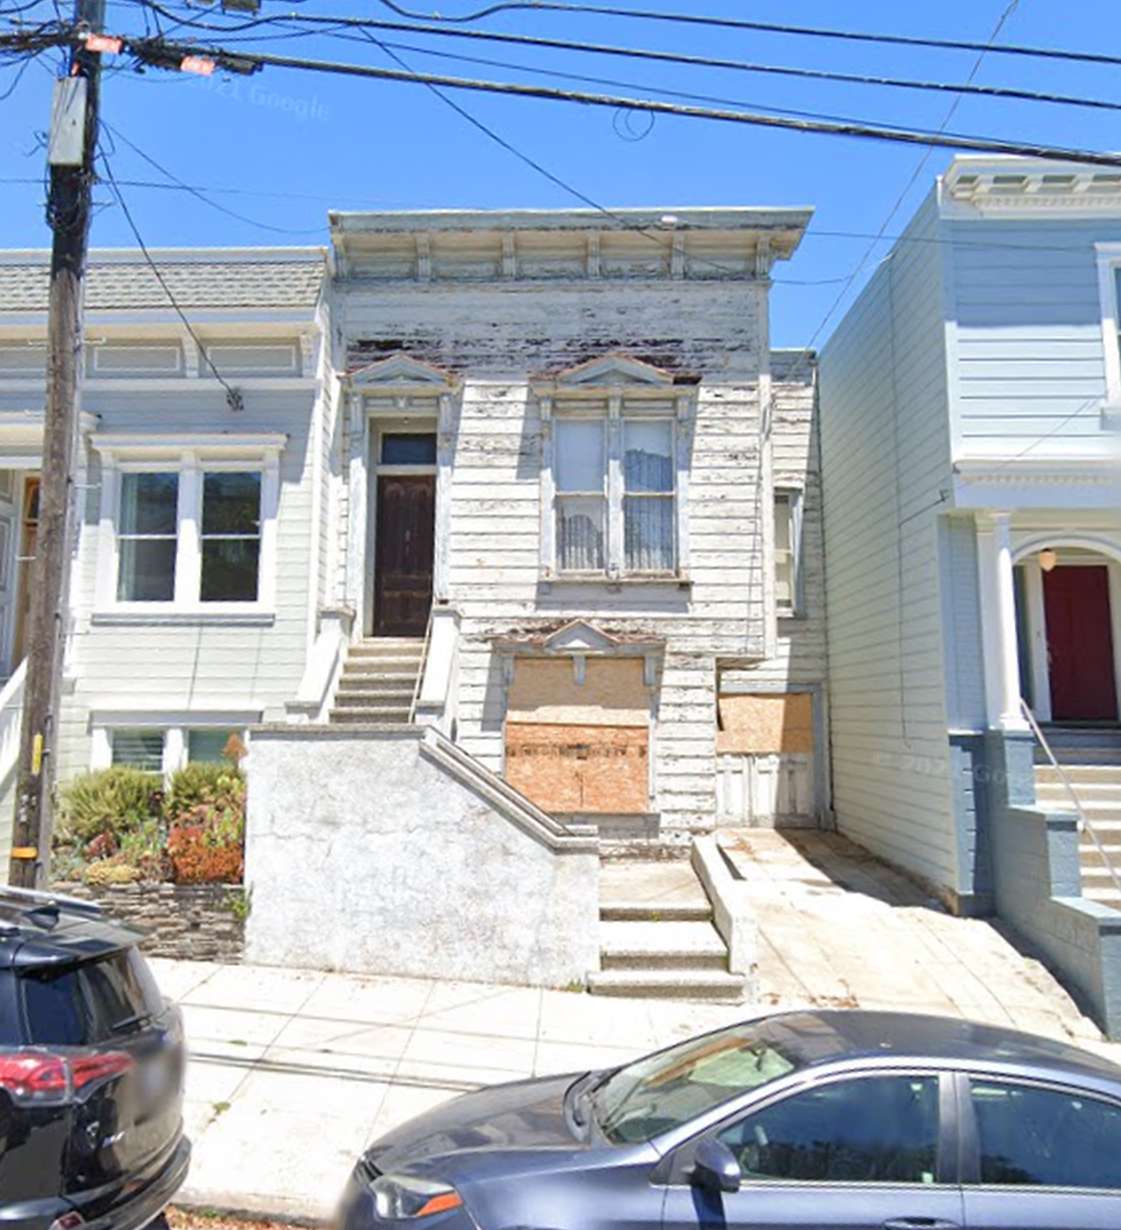 image showing This house with 2 bathrooms and no useable bedrooms on a 2158sf lot just sold for $1.97M in SF.